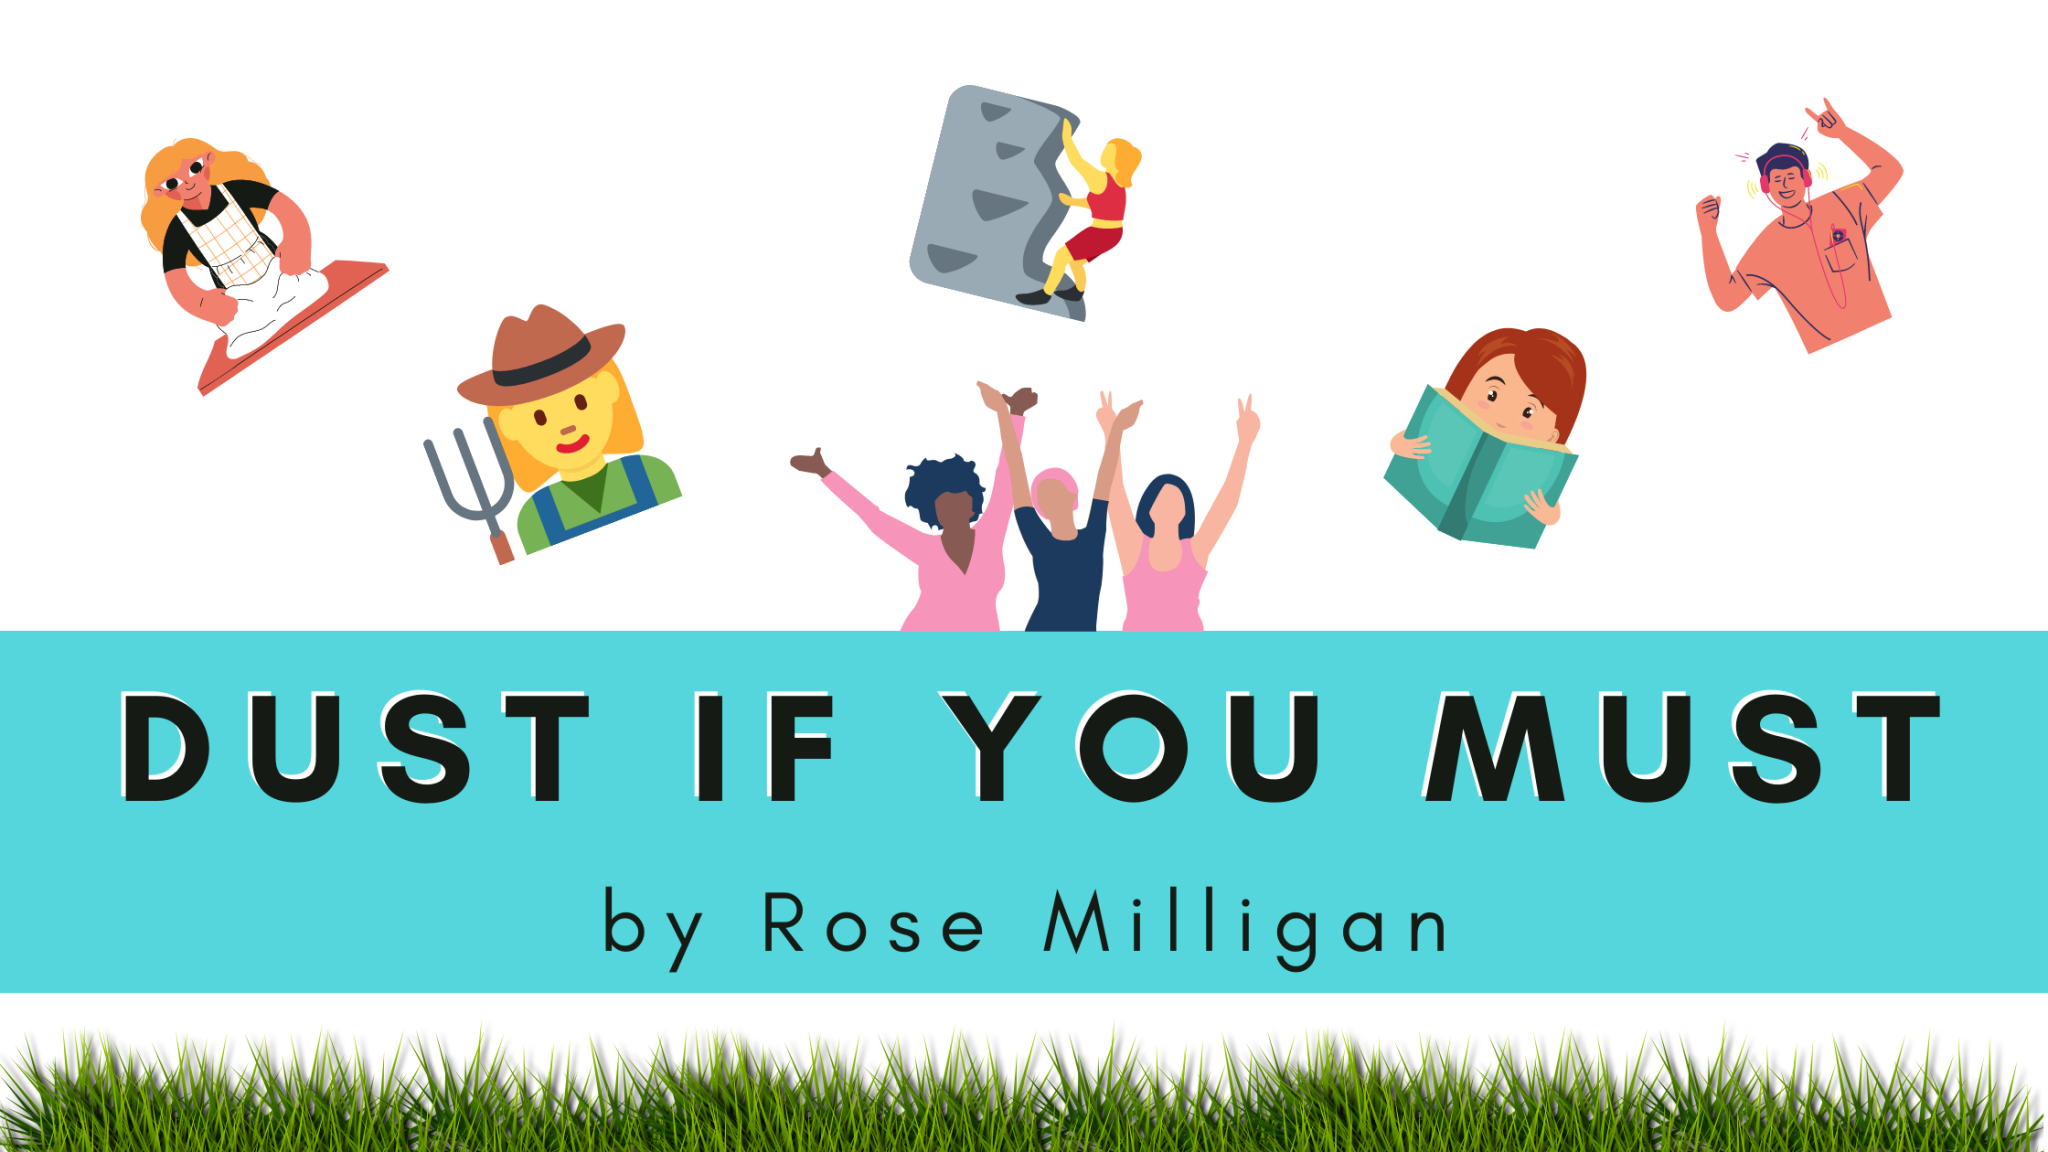 Dust if you must by Rose Milligan